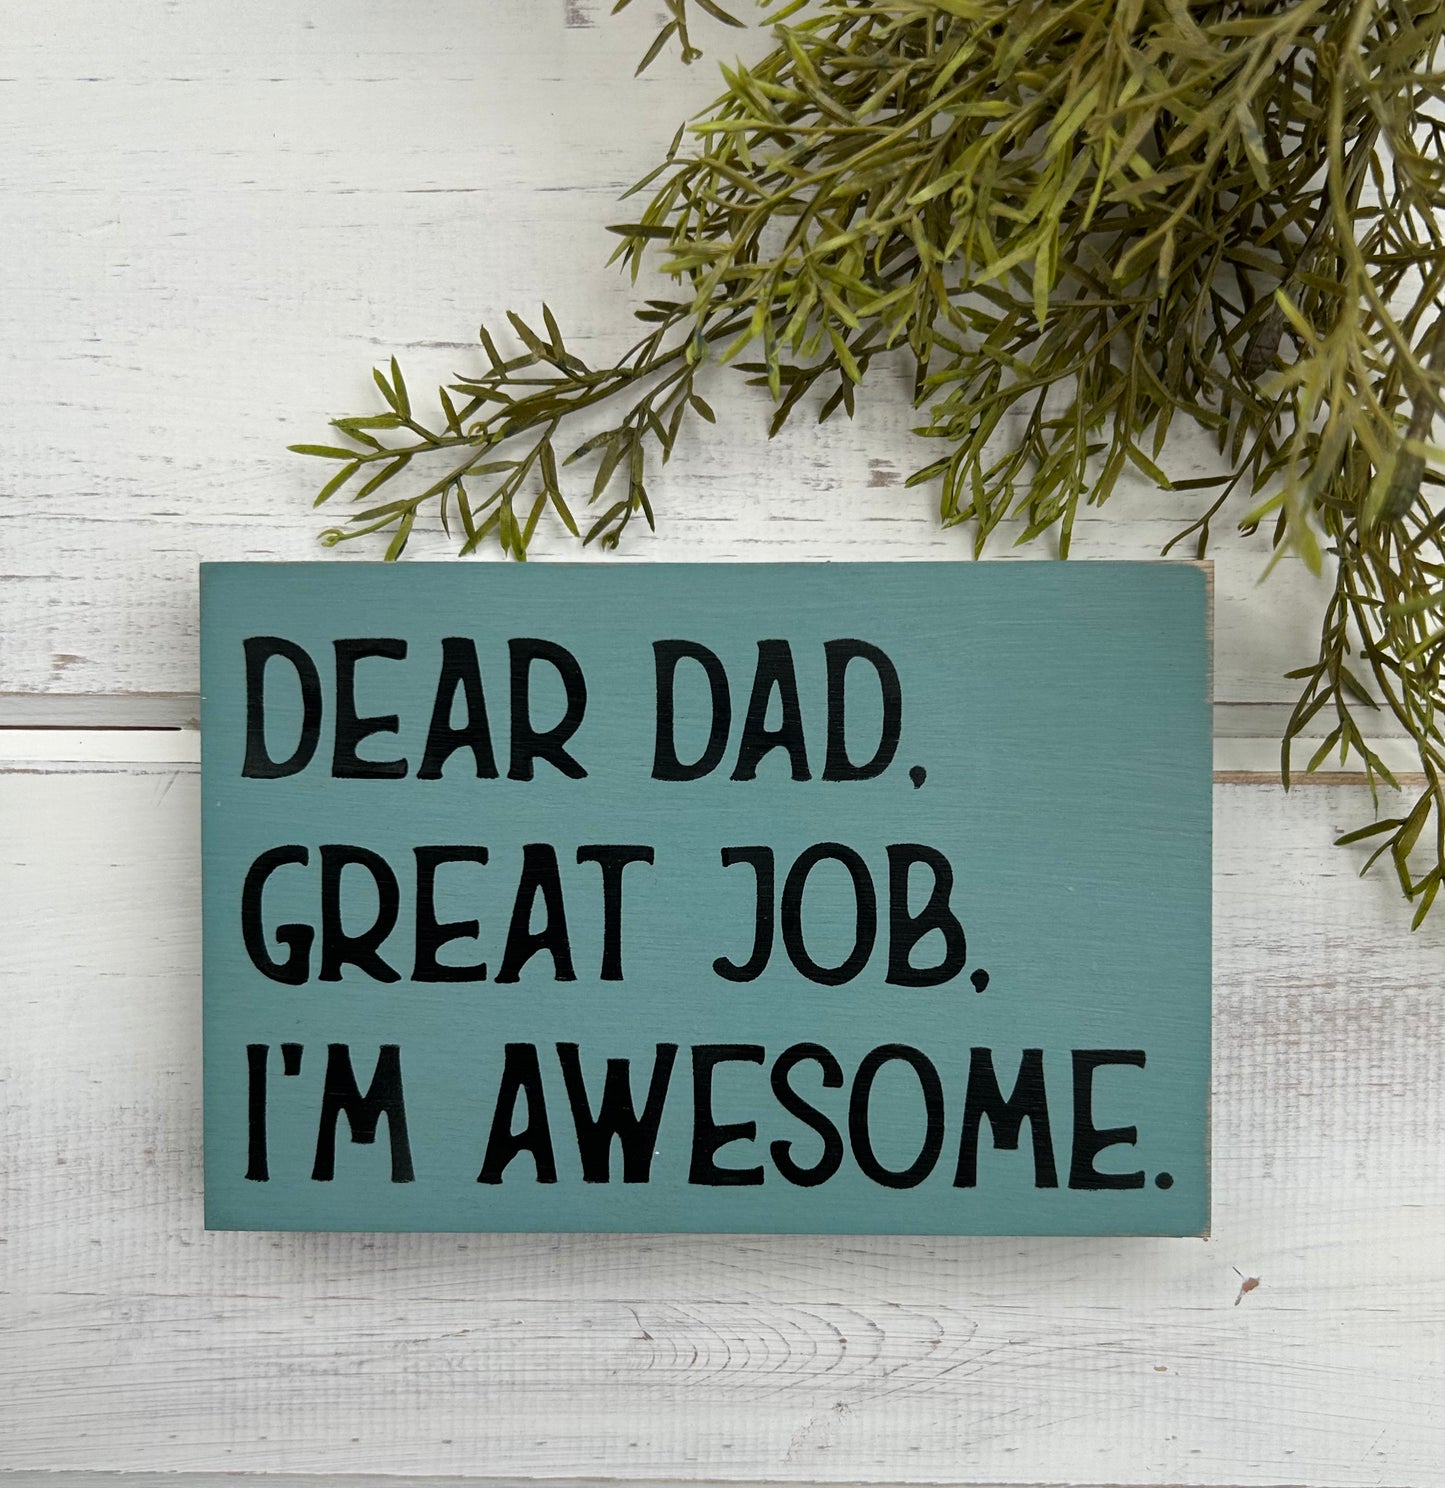 Dear Dad, Great Job, I'm Awesome - Funny Rustic Wood Sign